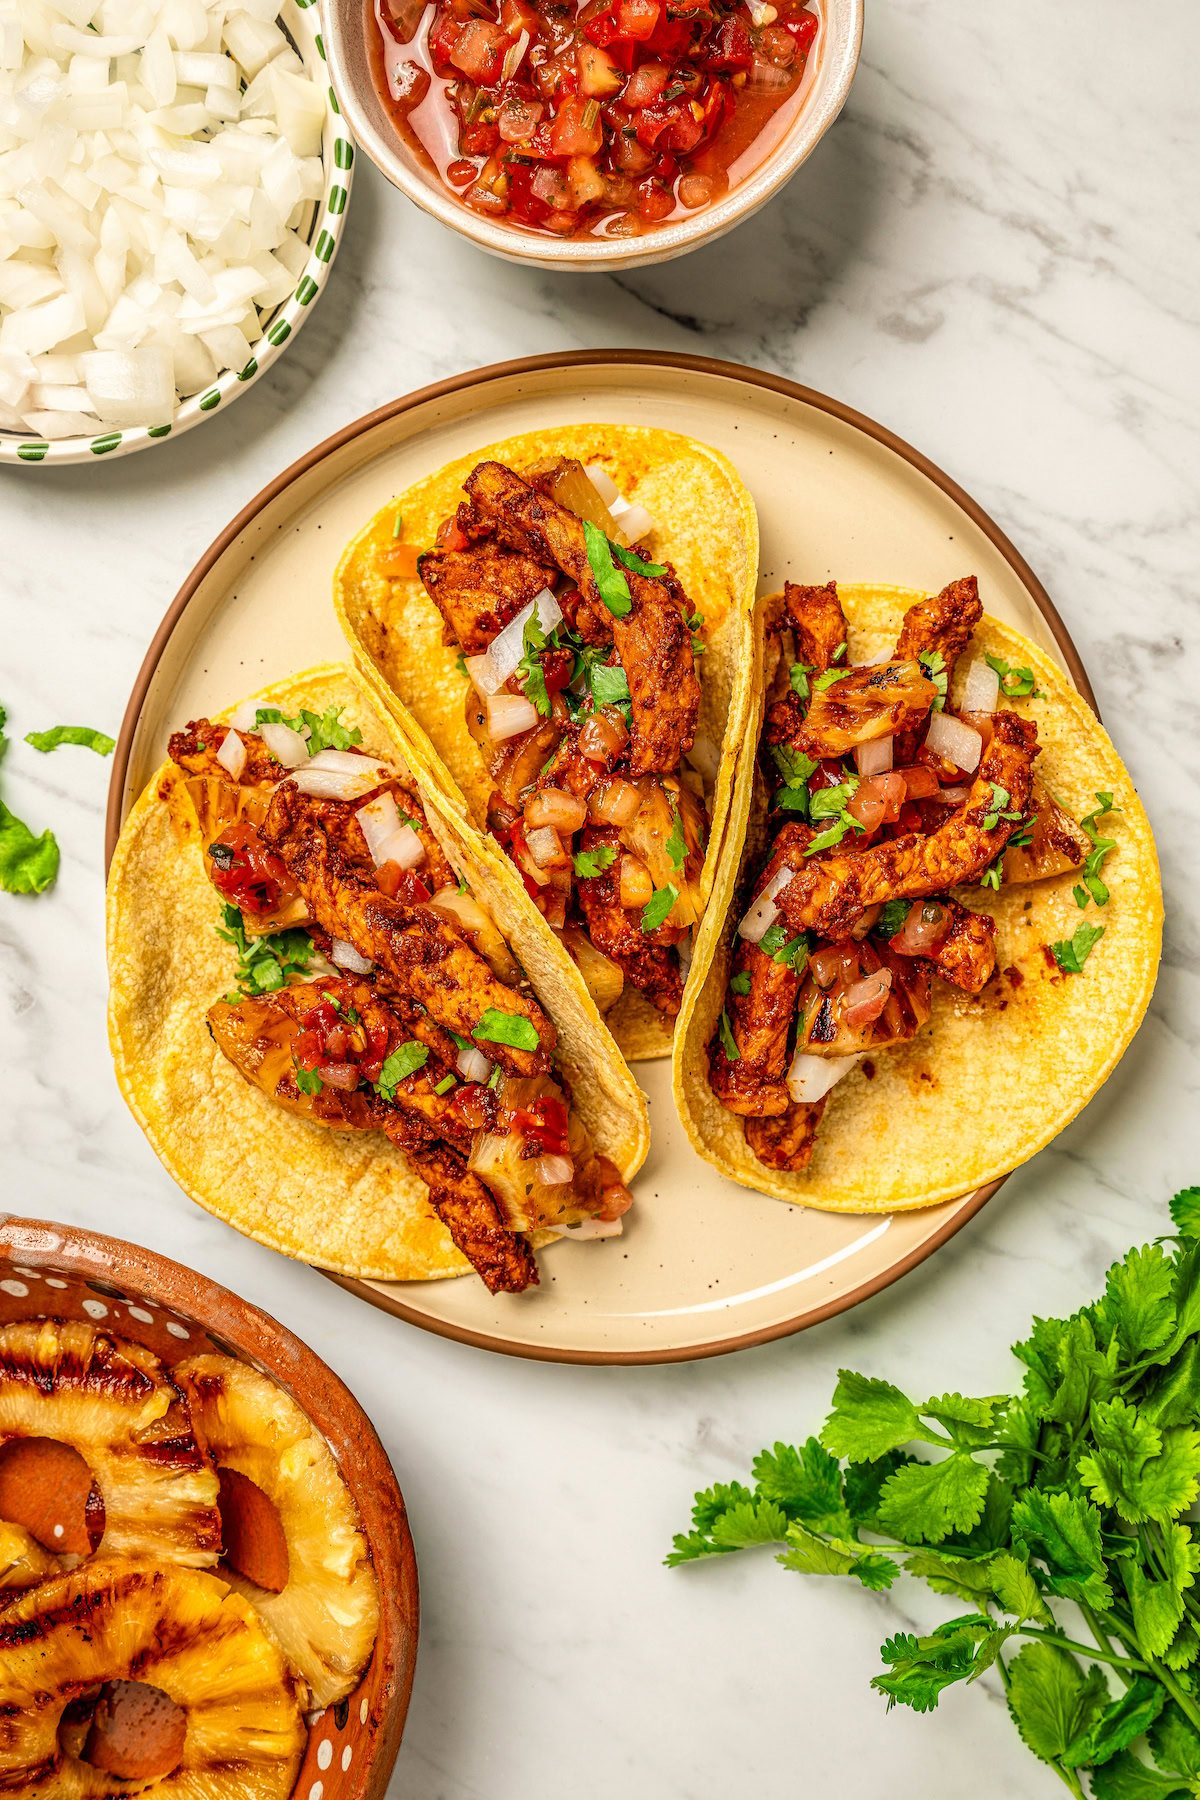 A plate of three authentic Al Pastor Tacos served on corn tortillas with grilled pineapple, diced onion and sals in bowls on the side.